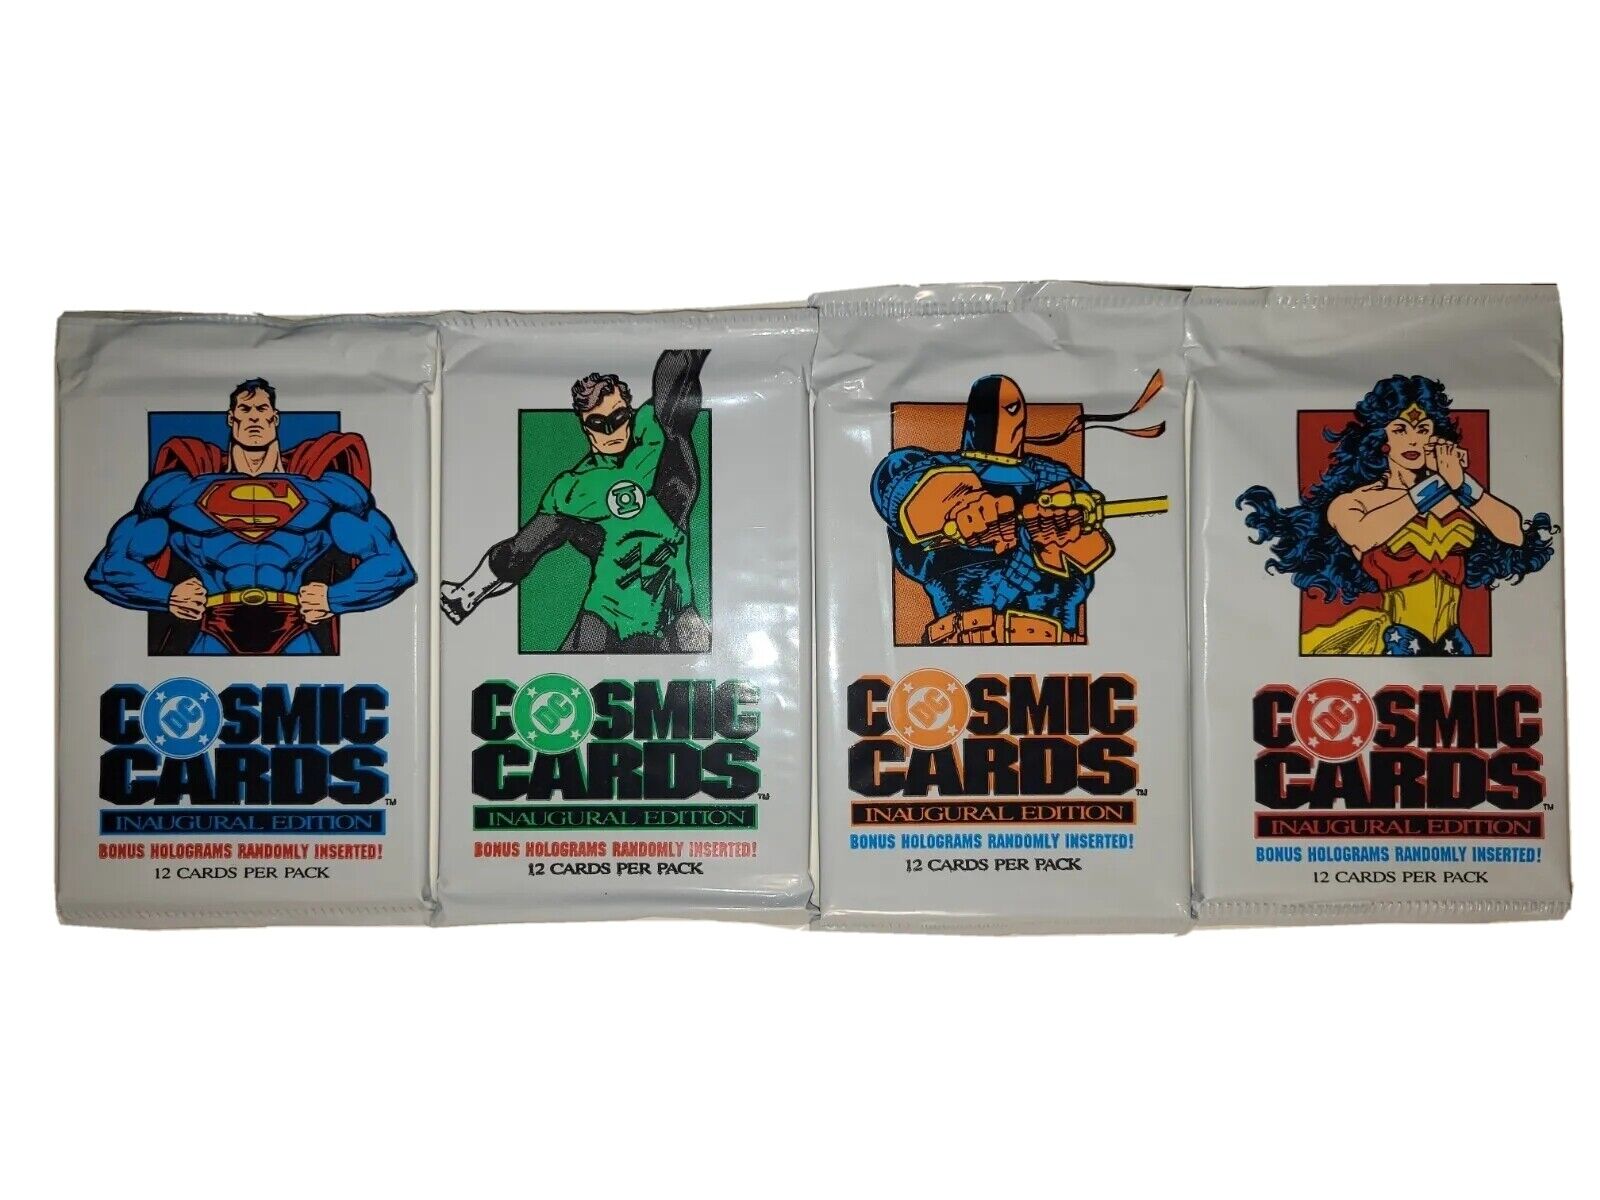 1991 DC Comics Cosmic Cards Impel Pack Art Lot of 4 vintage trading card packs